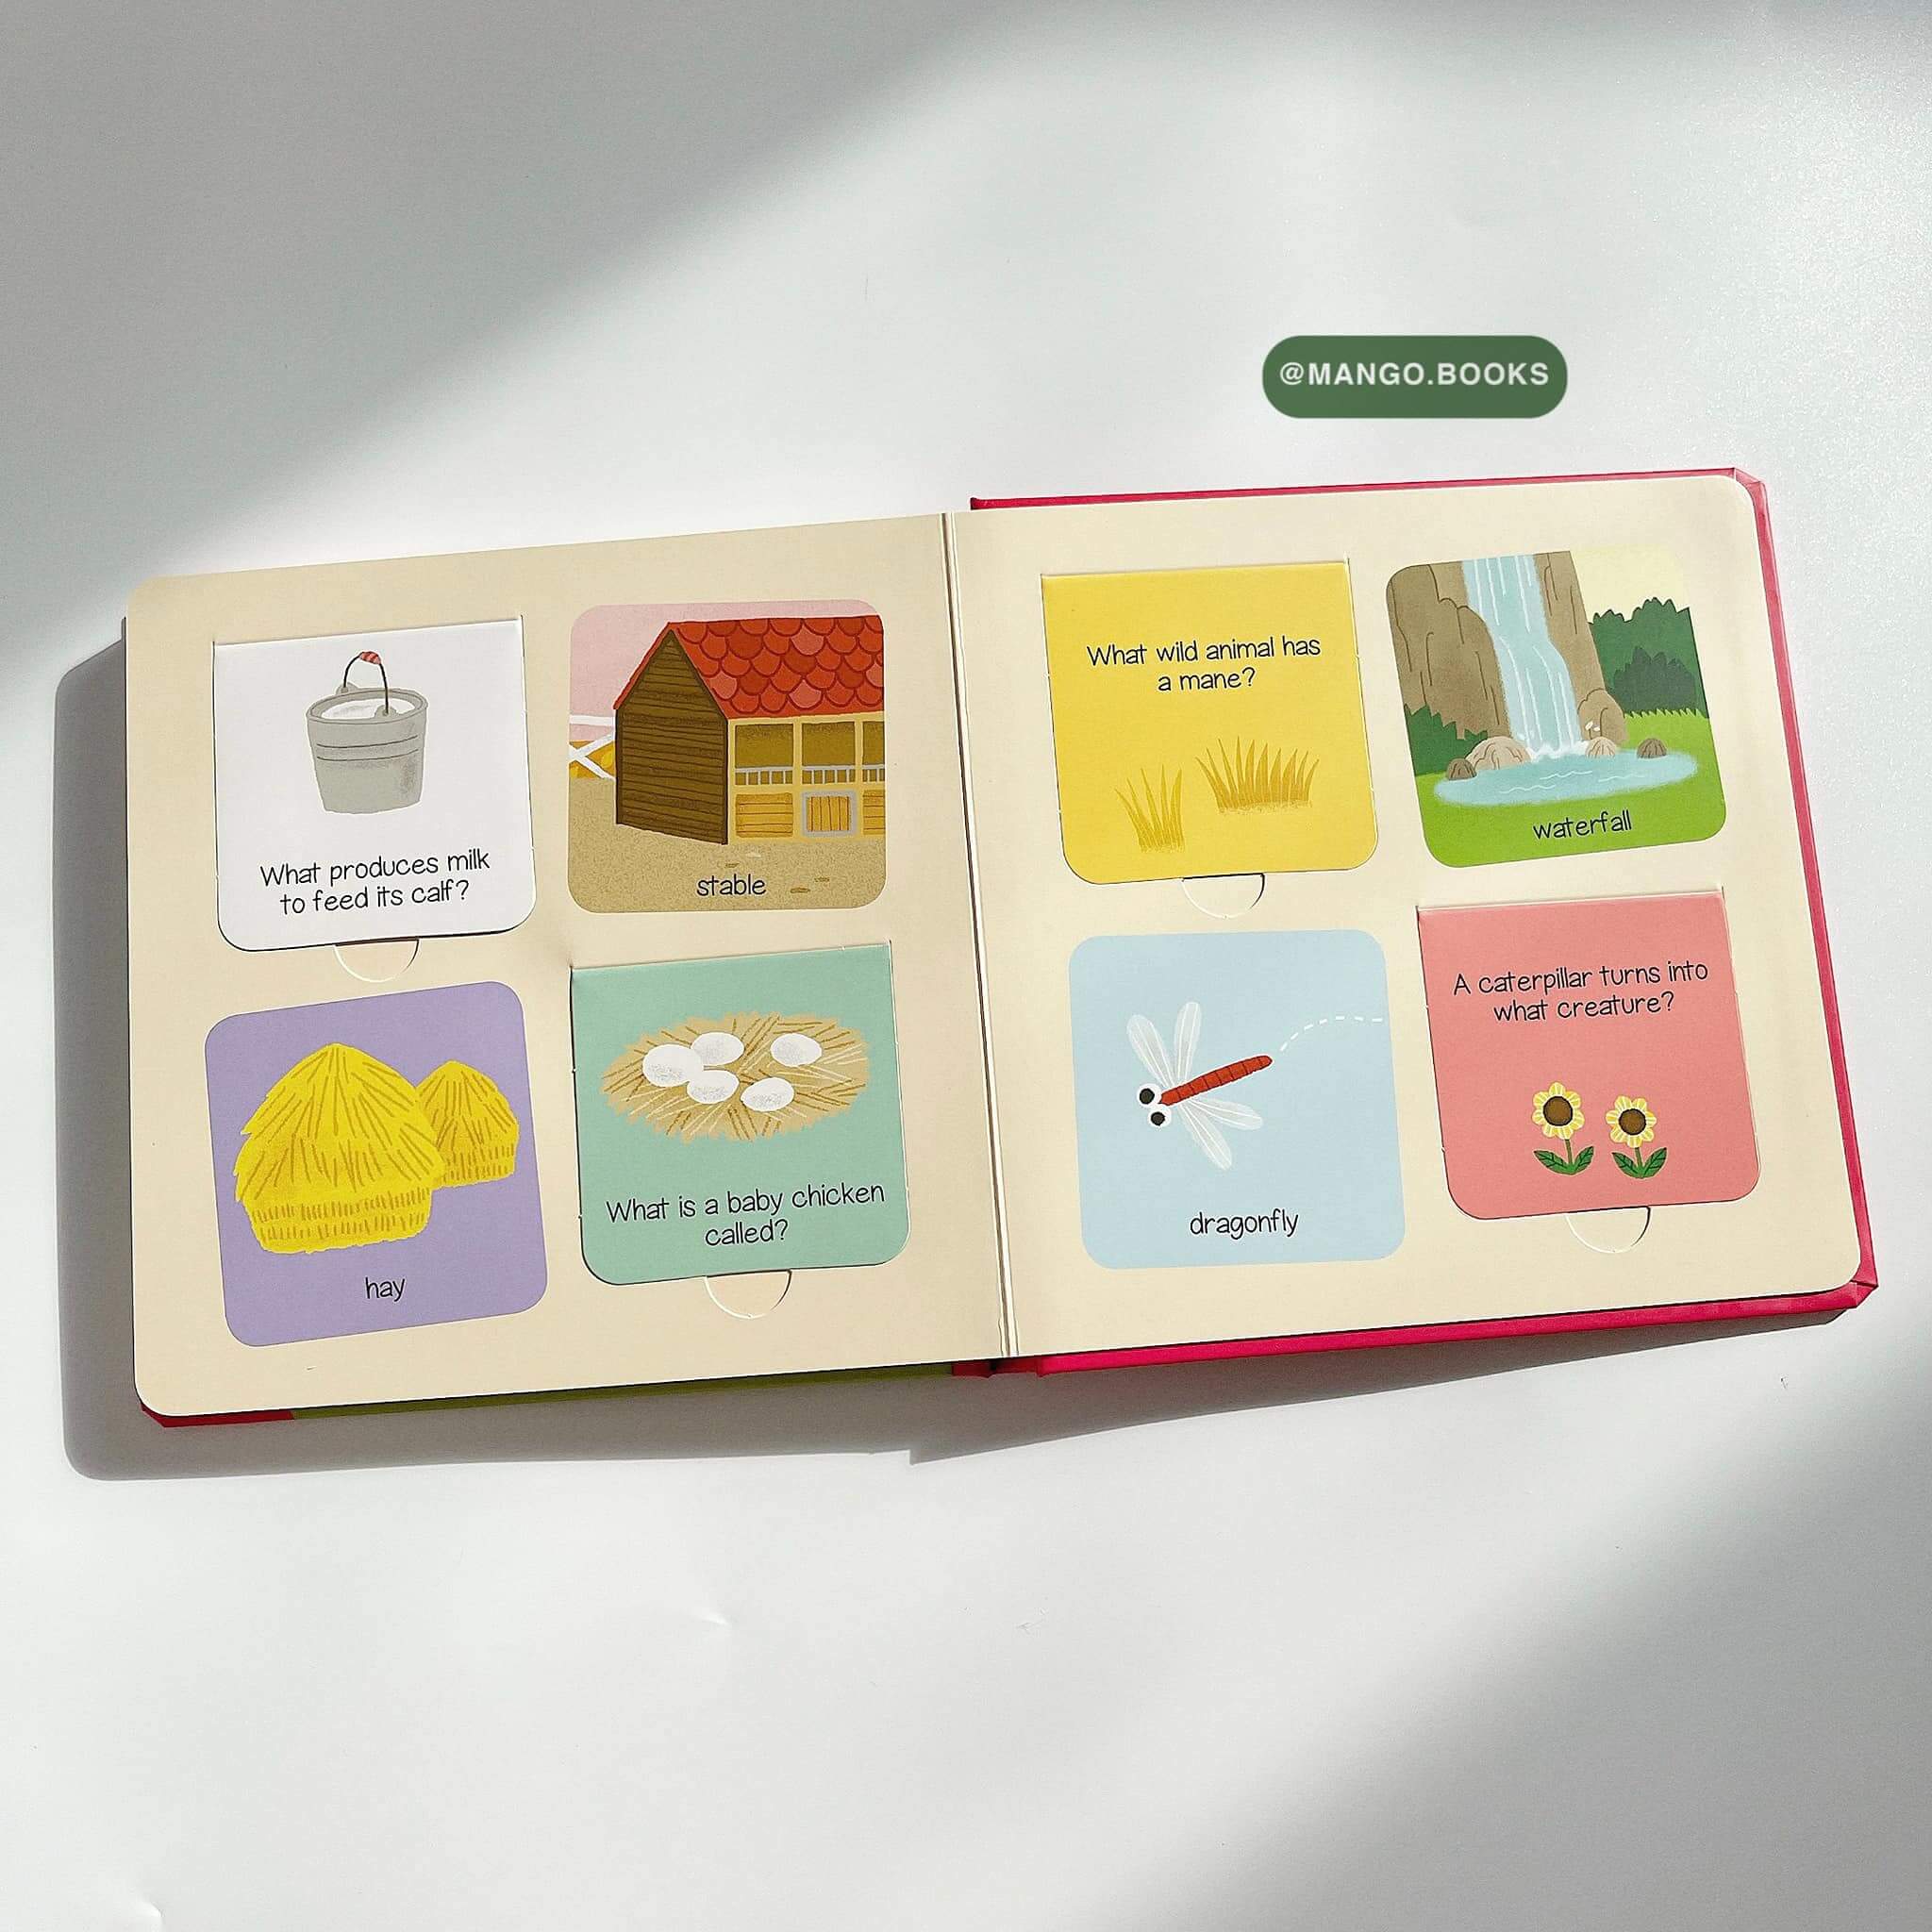 My First Animated Board Book: Baby Animals